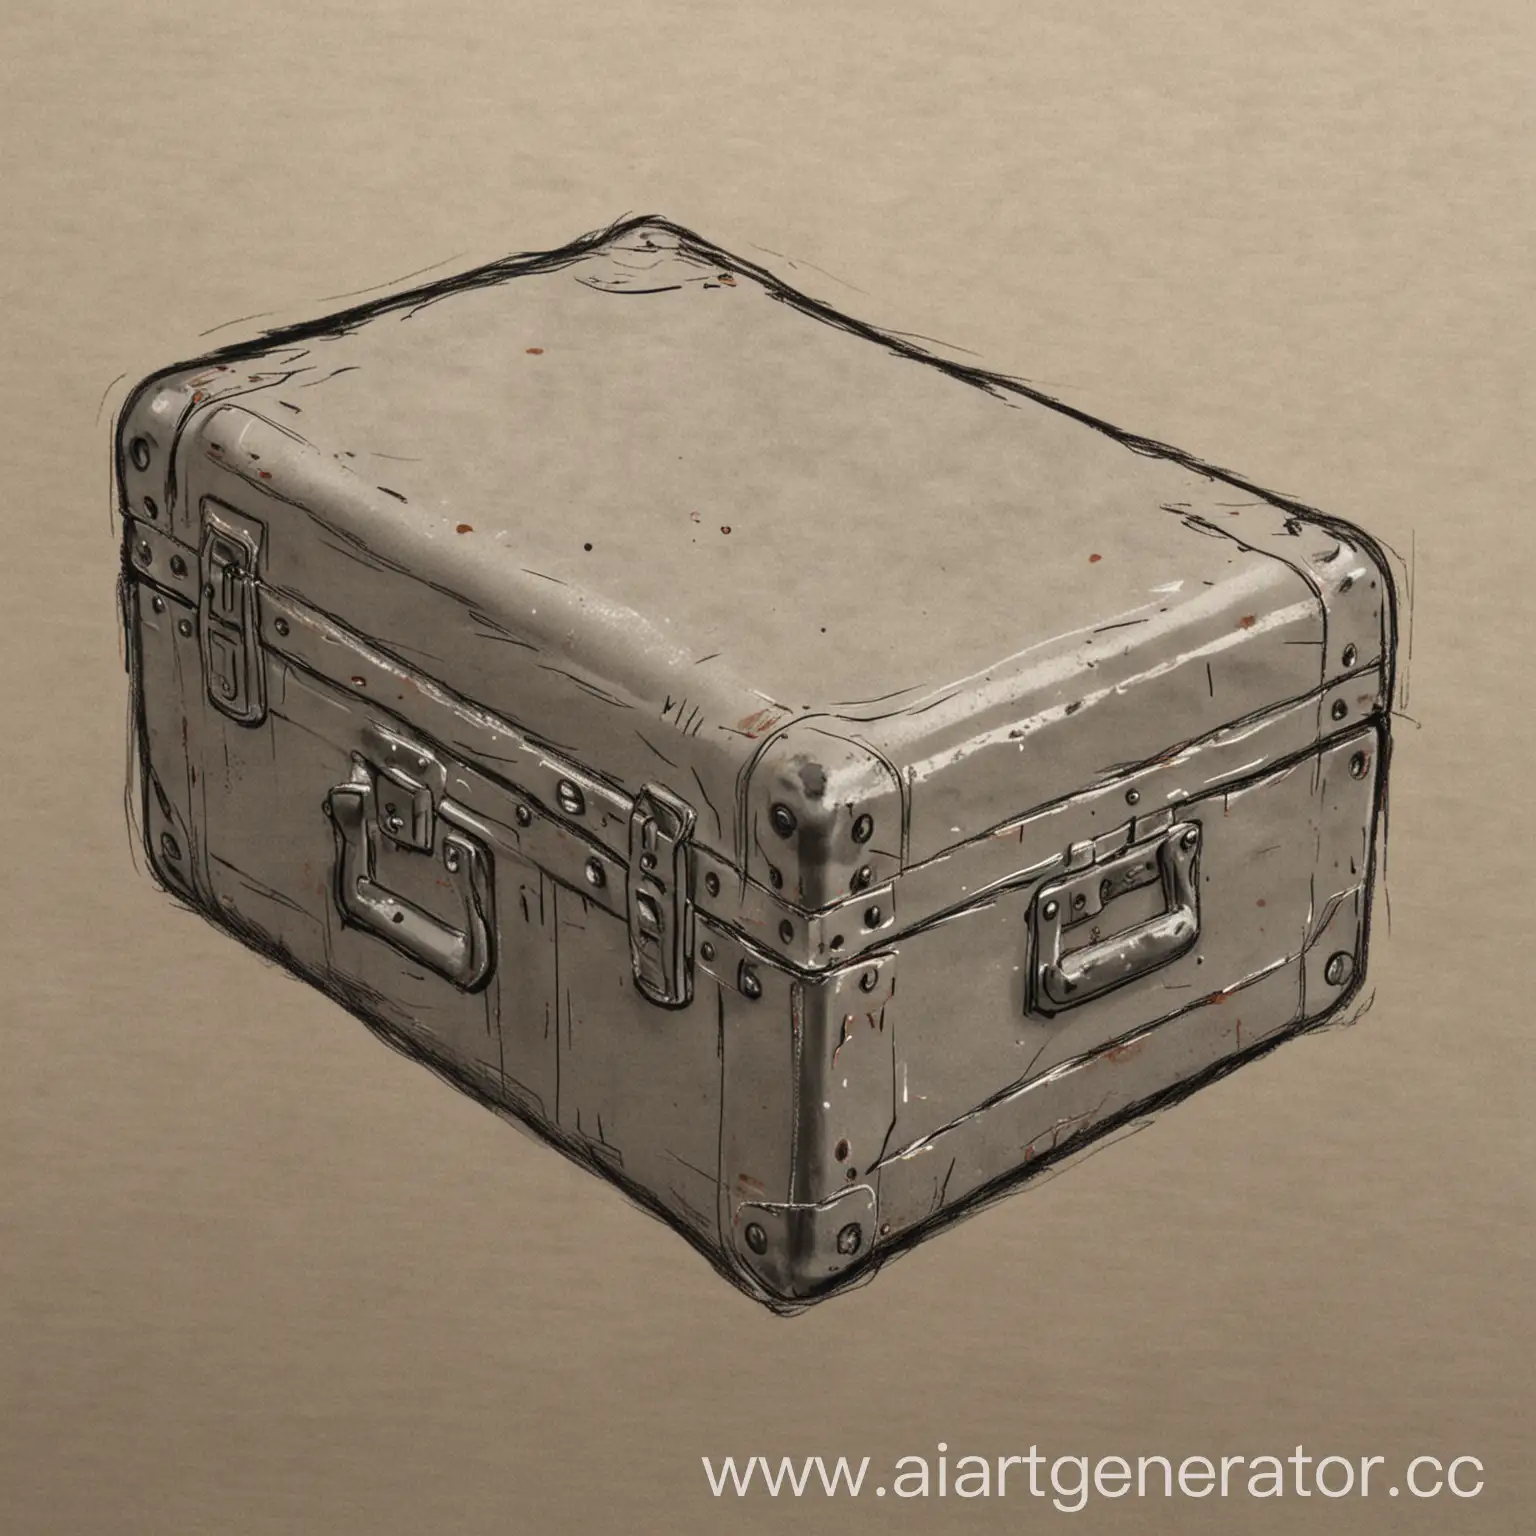 Legal-Briefcase-with-Confidential-Documents